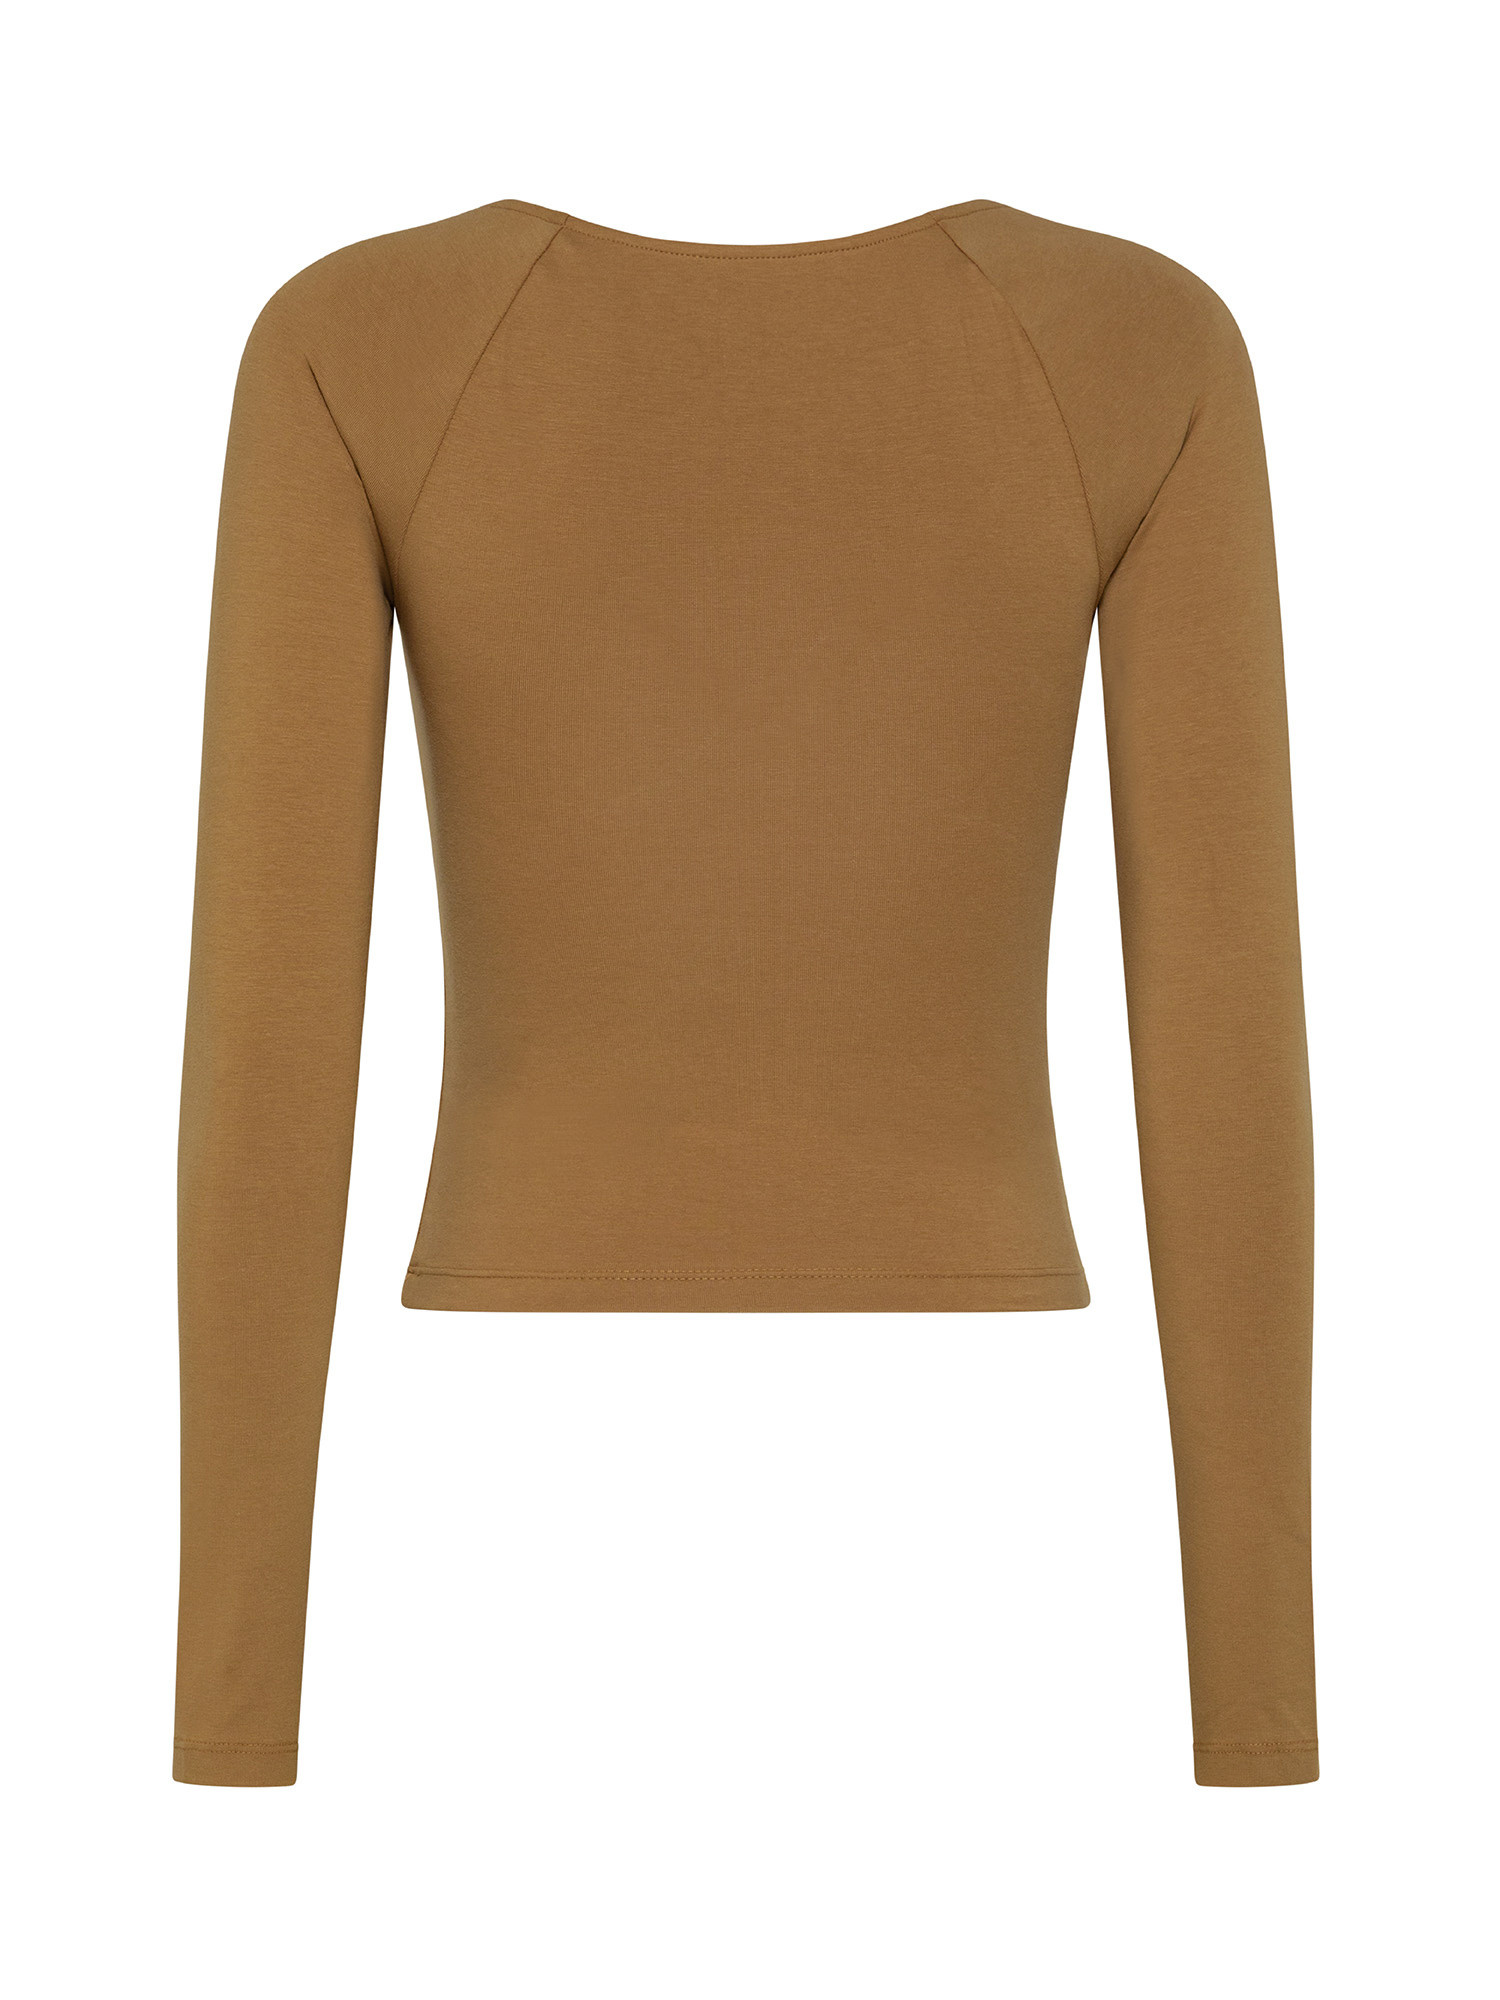 Knitted top, Brown, large image number 1